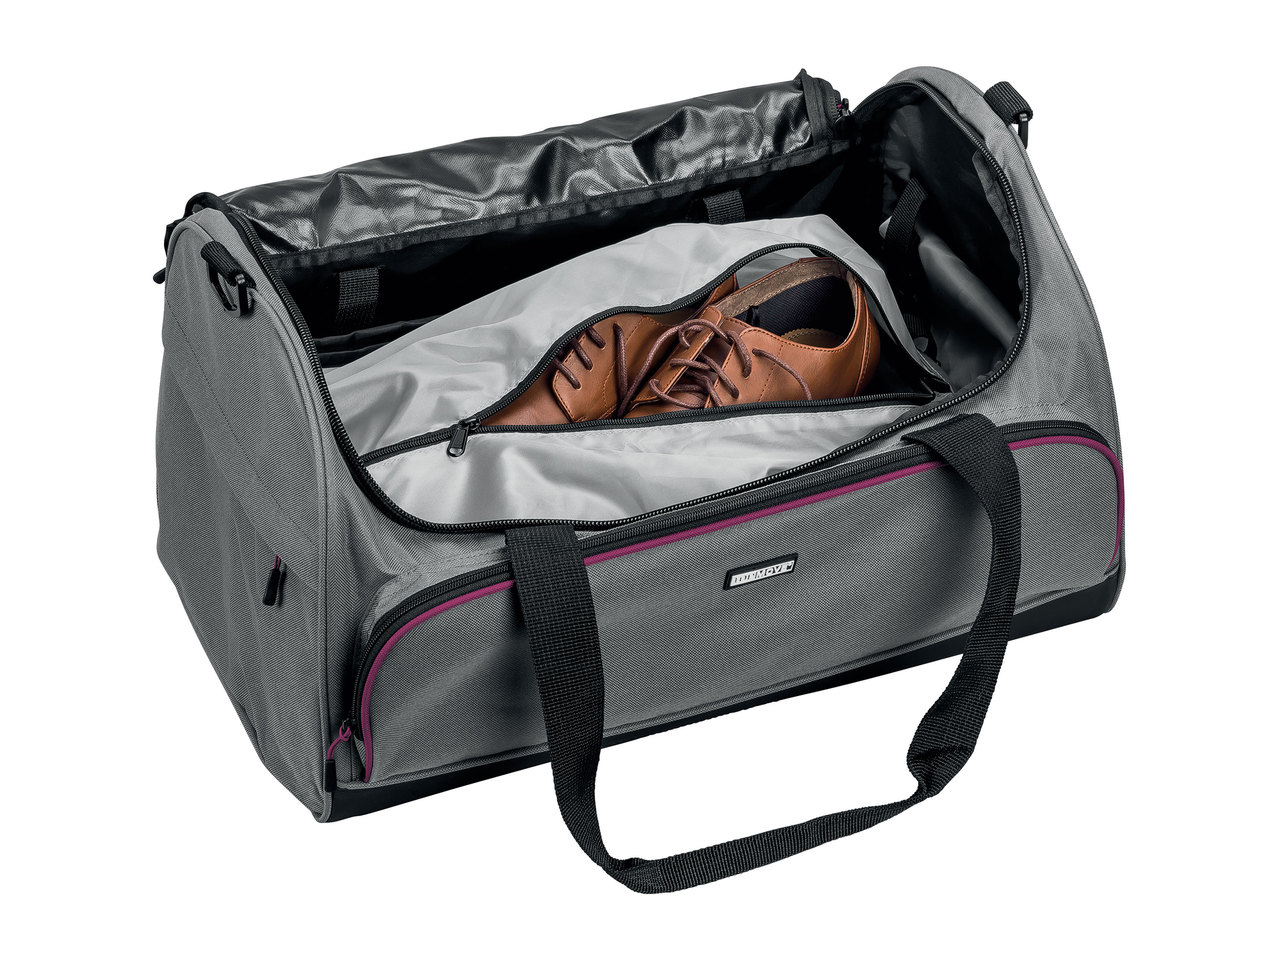 Top Move Travel Bag with Built-In Organiser Shelves1